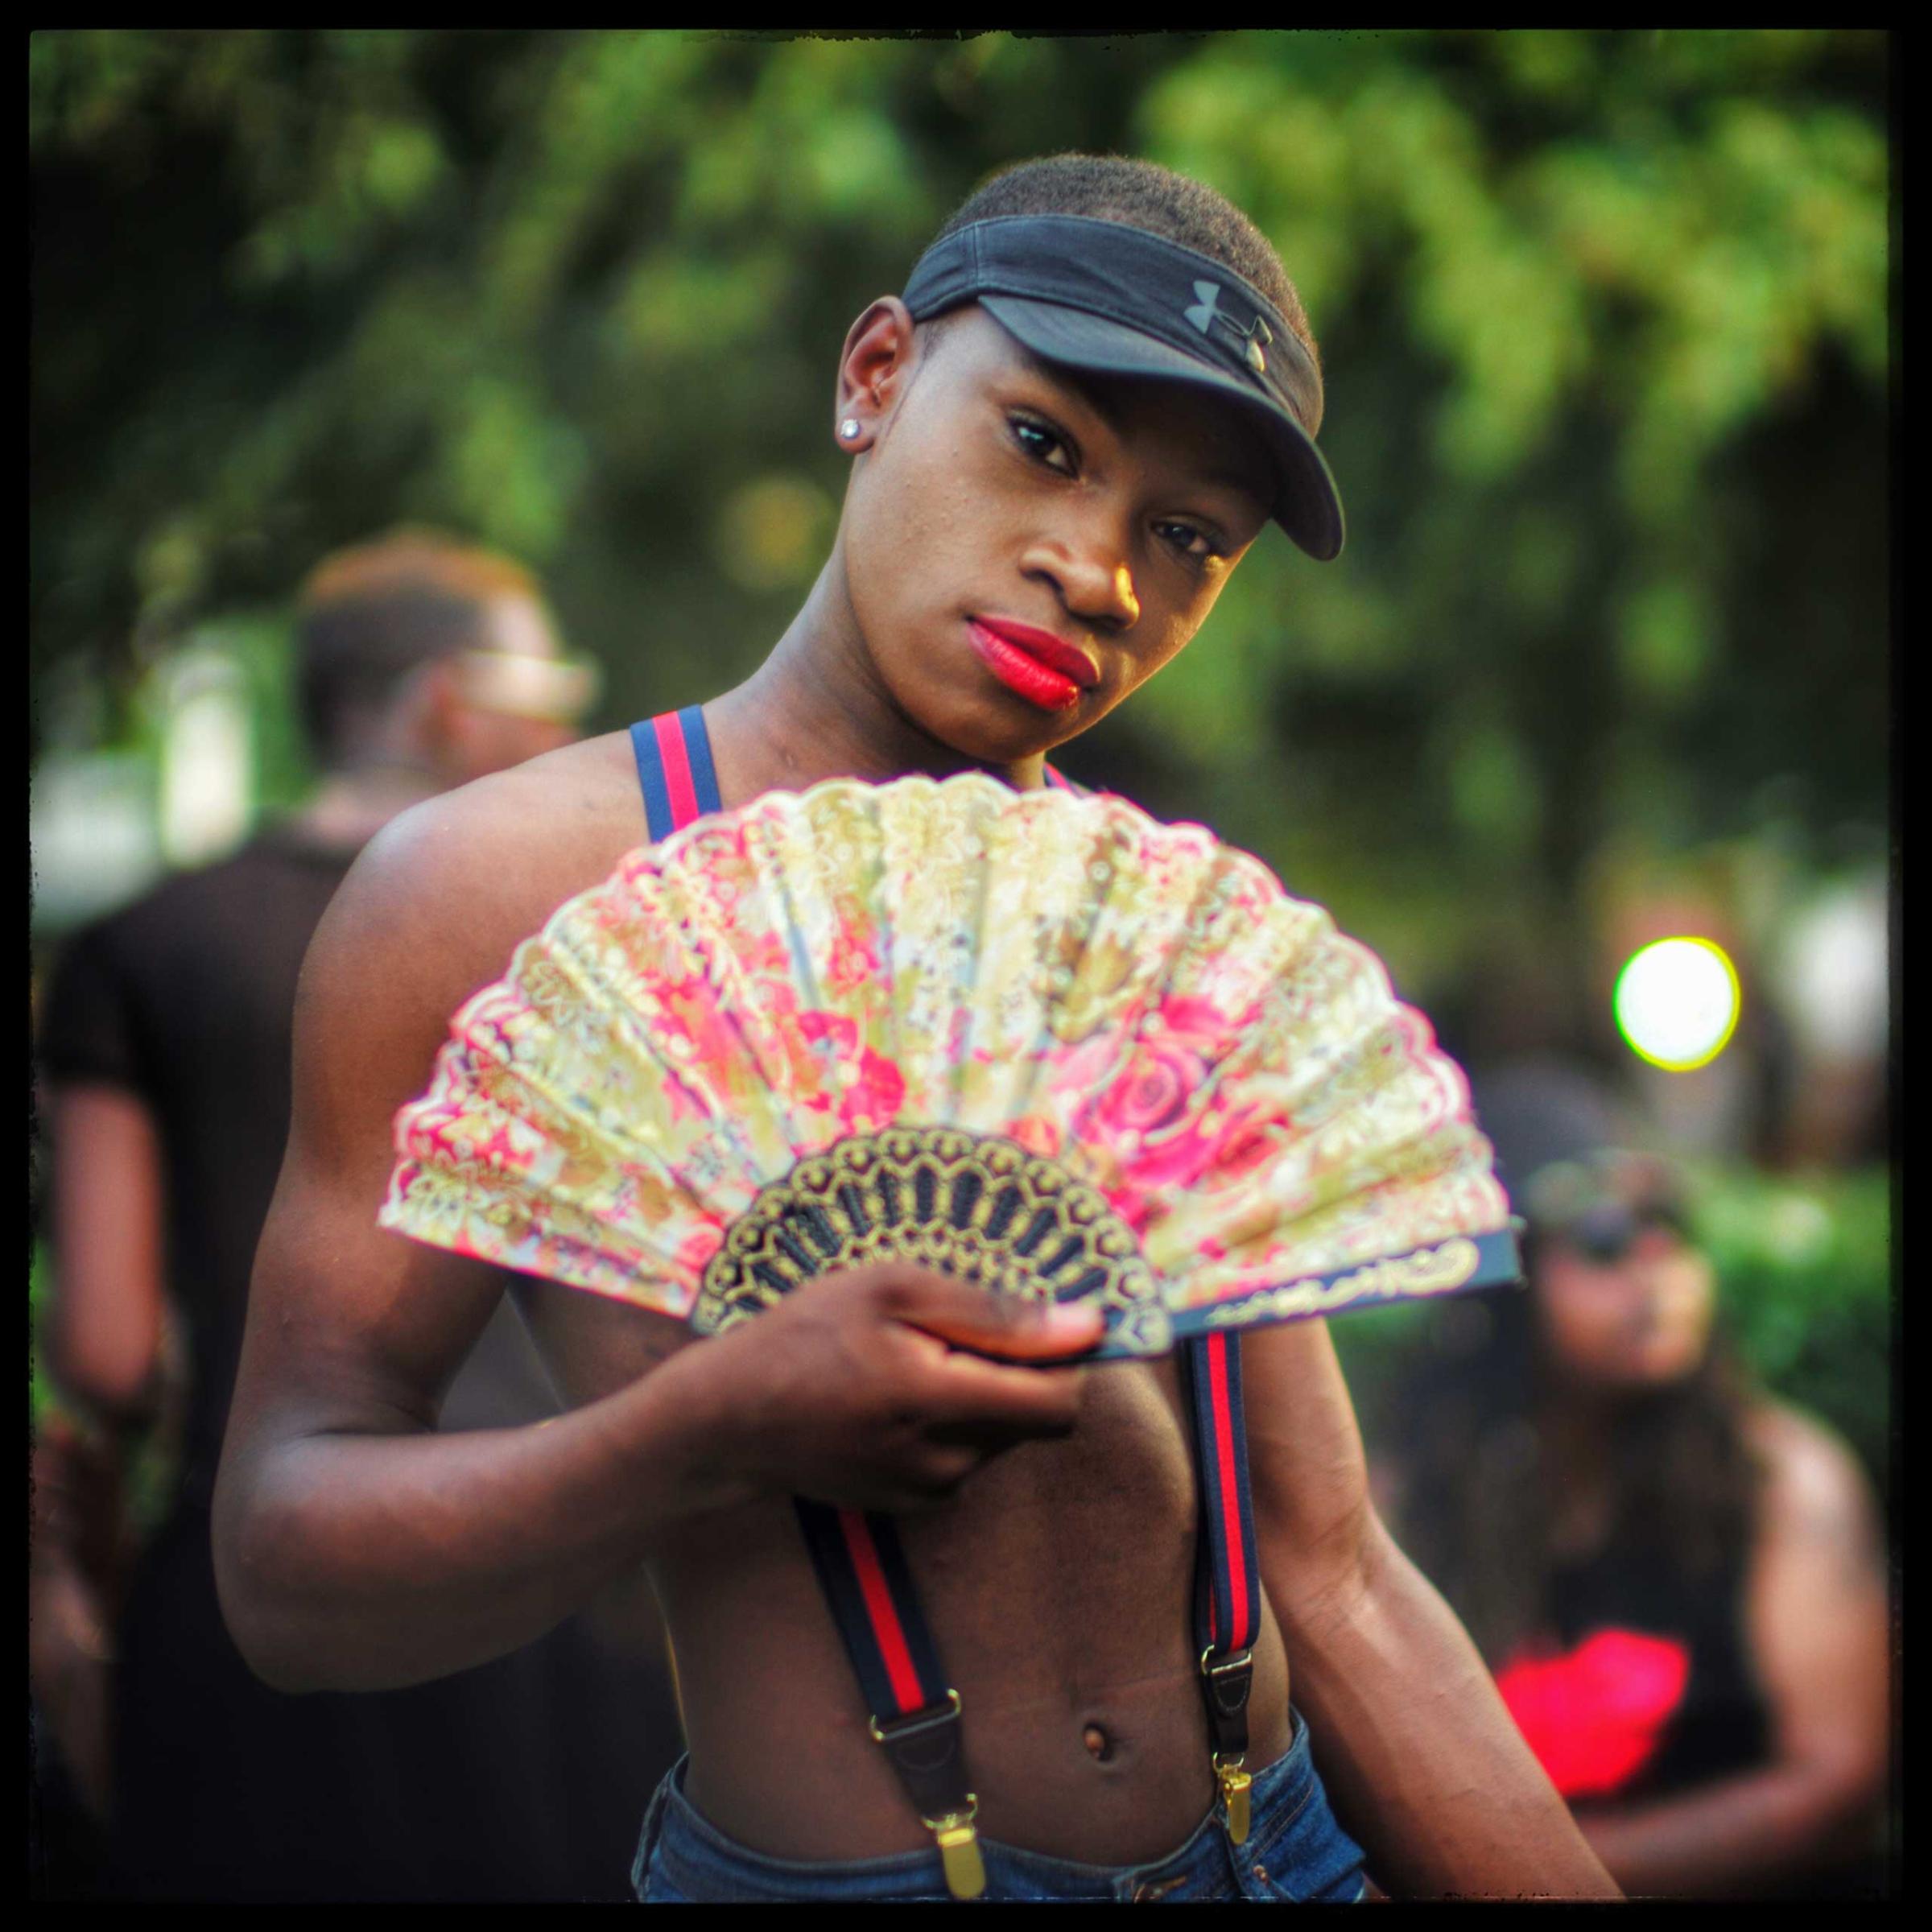 A D.C. Pride goer poses for a photograph before inviting me to come to Miami to photograph Miami Pride. Days later, a lone gunman opened fire inside The Pulse gay club in Orlando.